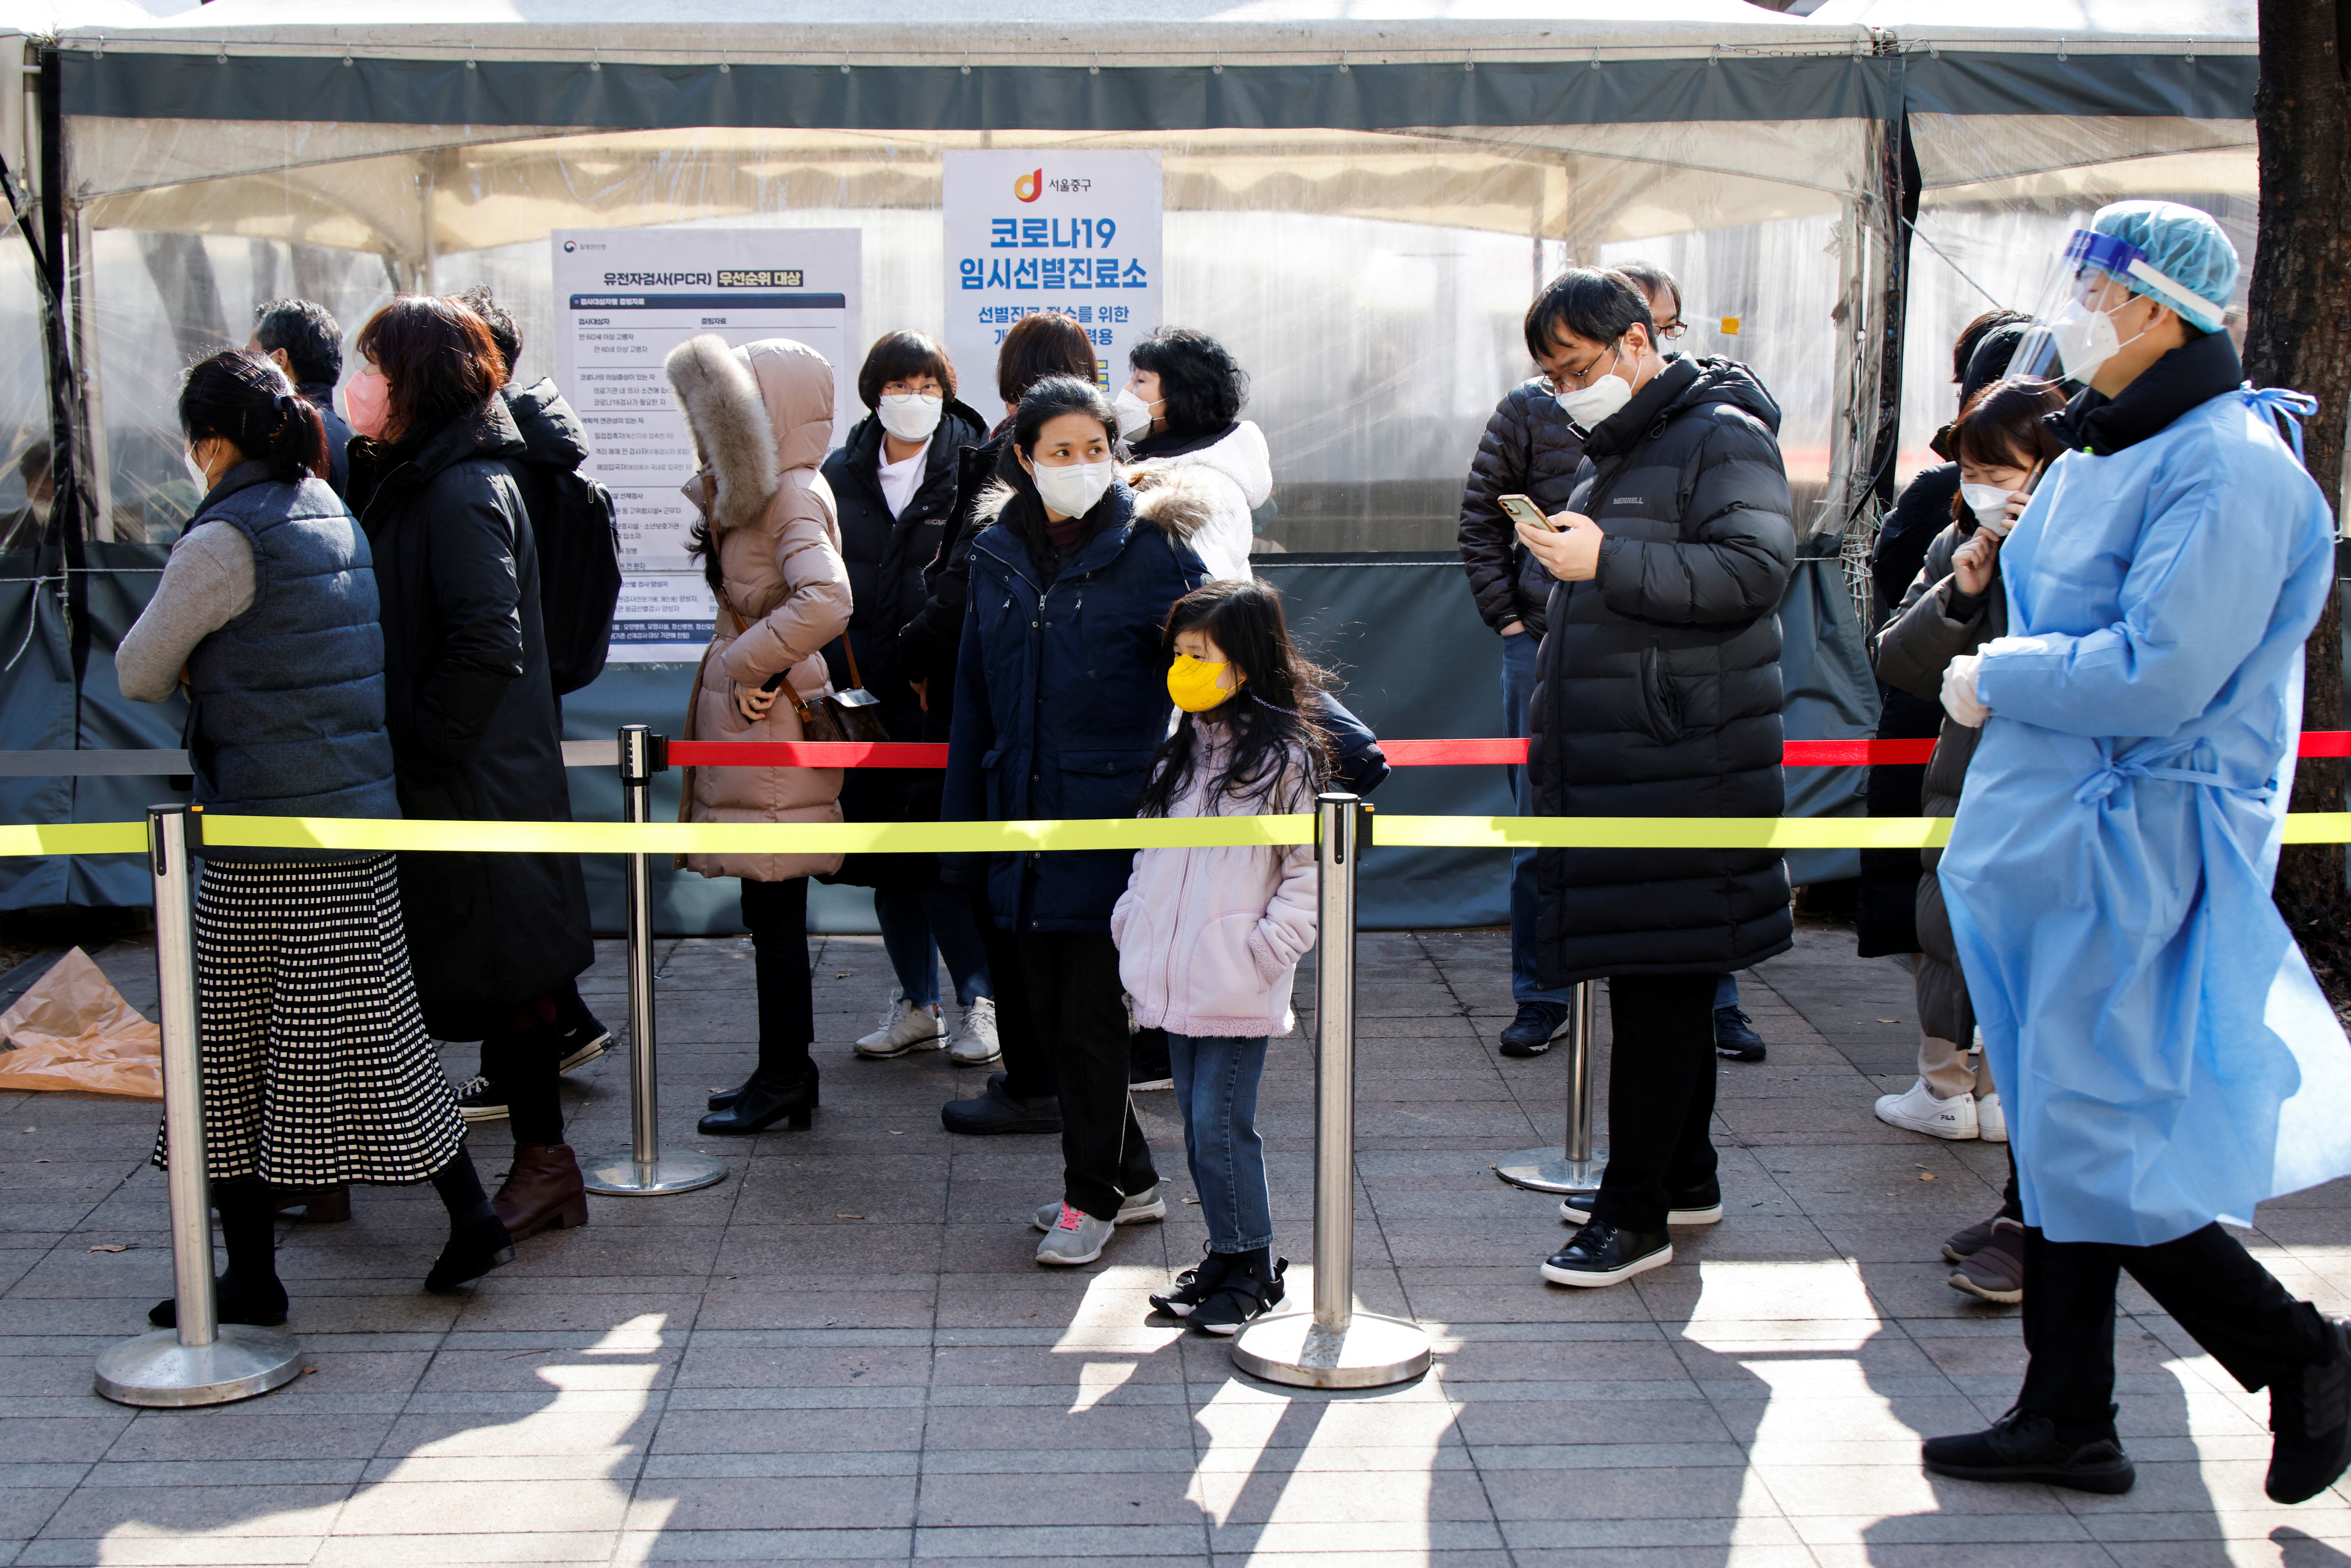 People wait in line to undergo the COVID-19 test in Seoul